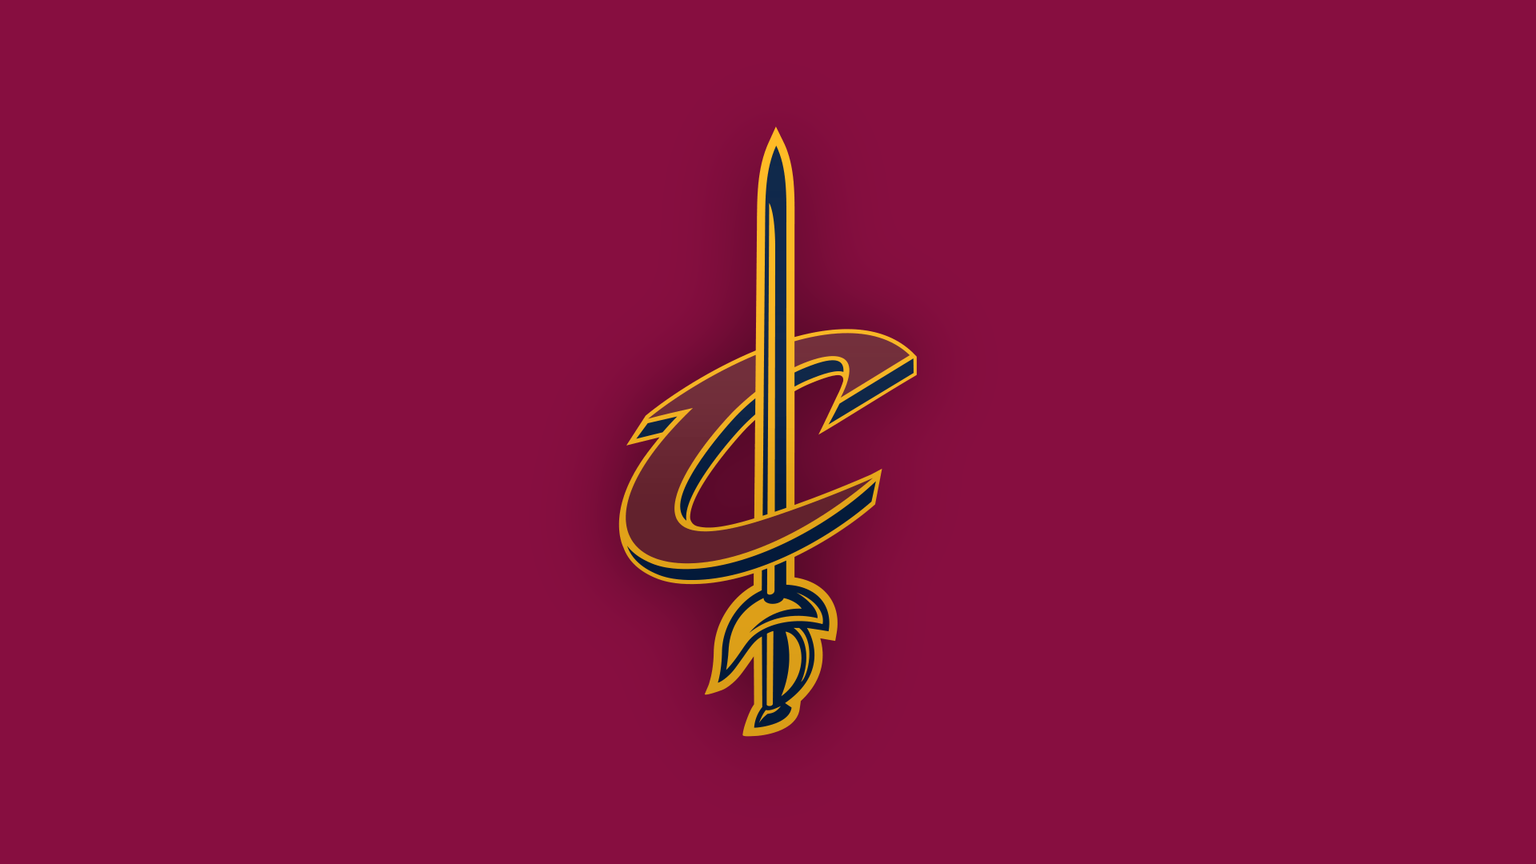 Cleveland Cavaliers logo for the 5 best ever Cavs players